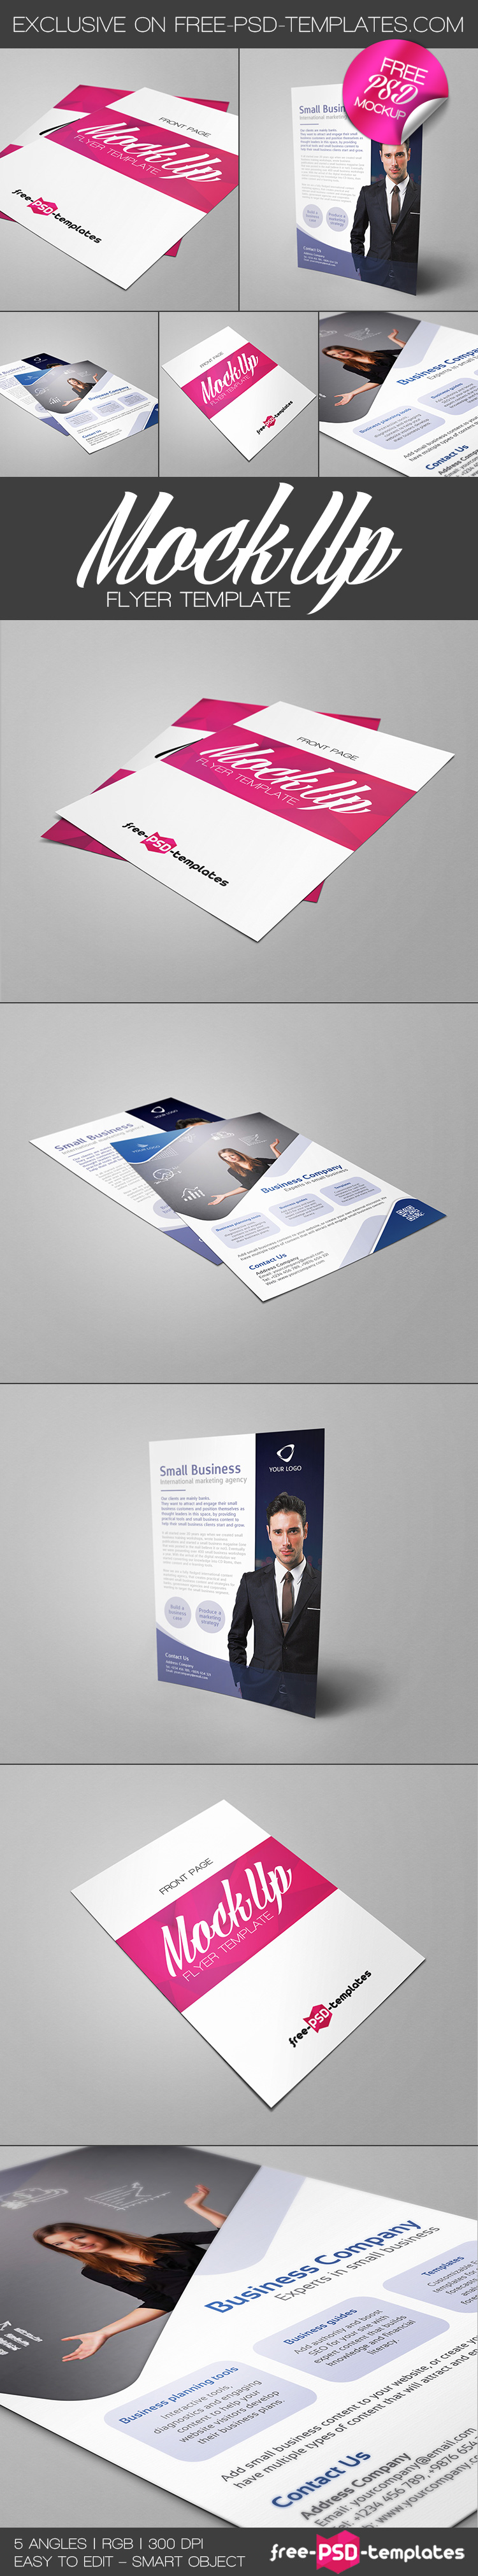 Download Free Flyer Mock-up in PSD | Free PSD Templates